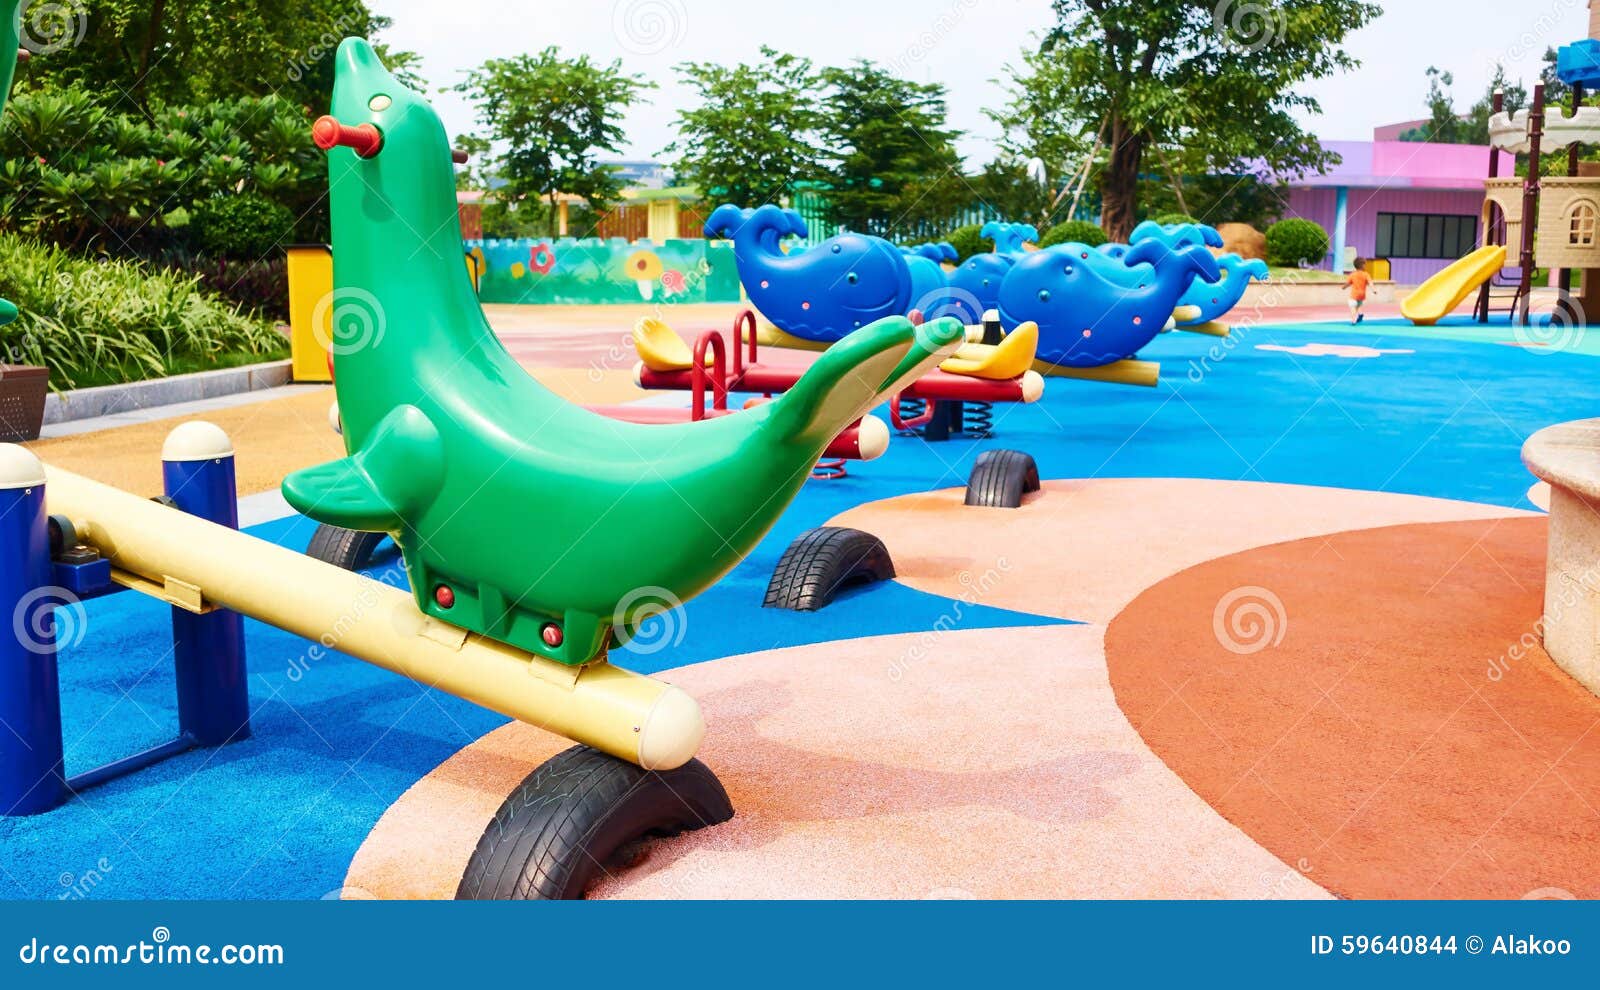 Seesaw on outdoor children playground in park. Colorful play equipment on kids playground.